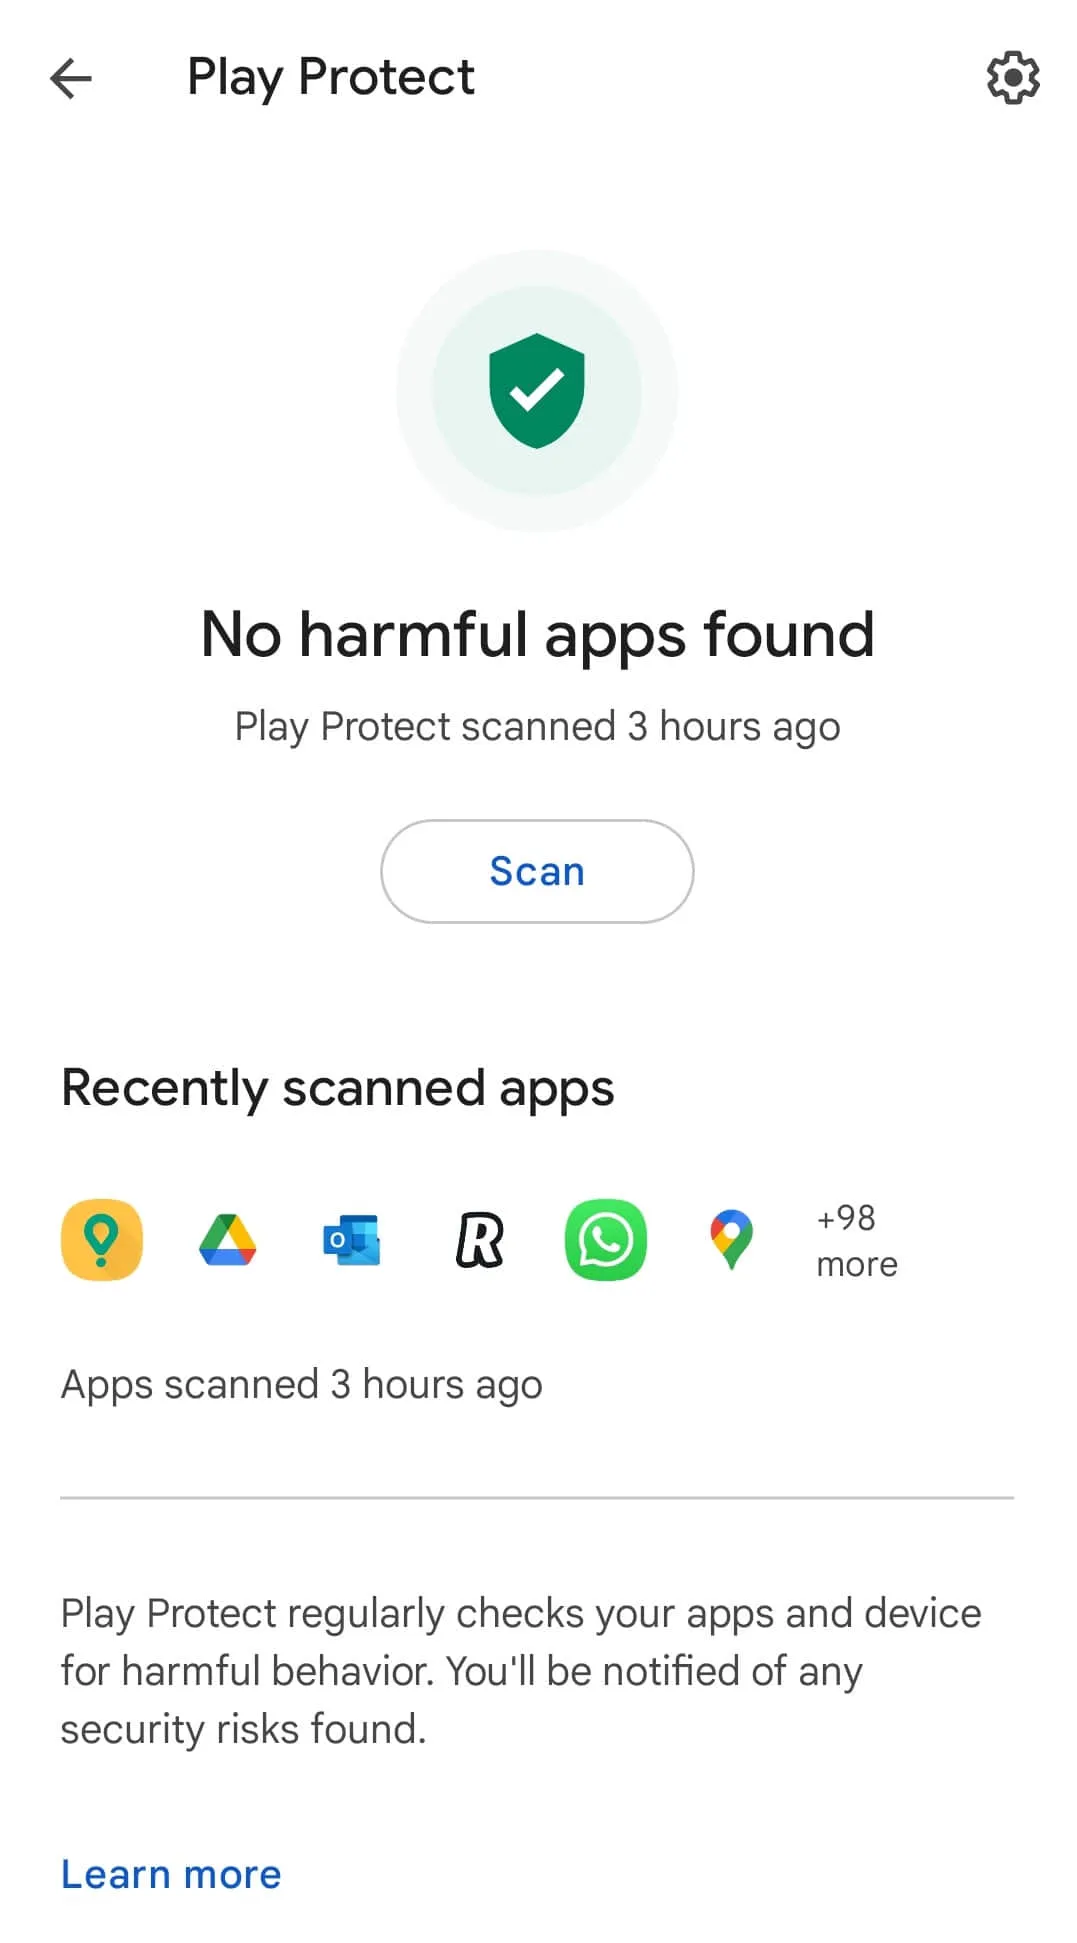 Main screen of Play Protect in the Play Store